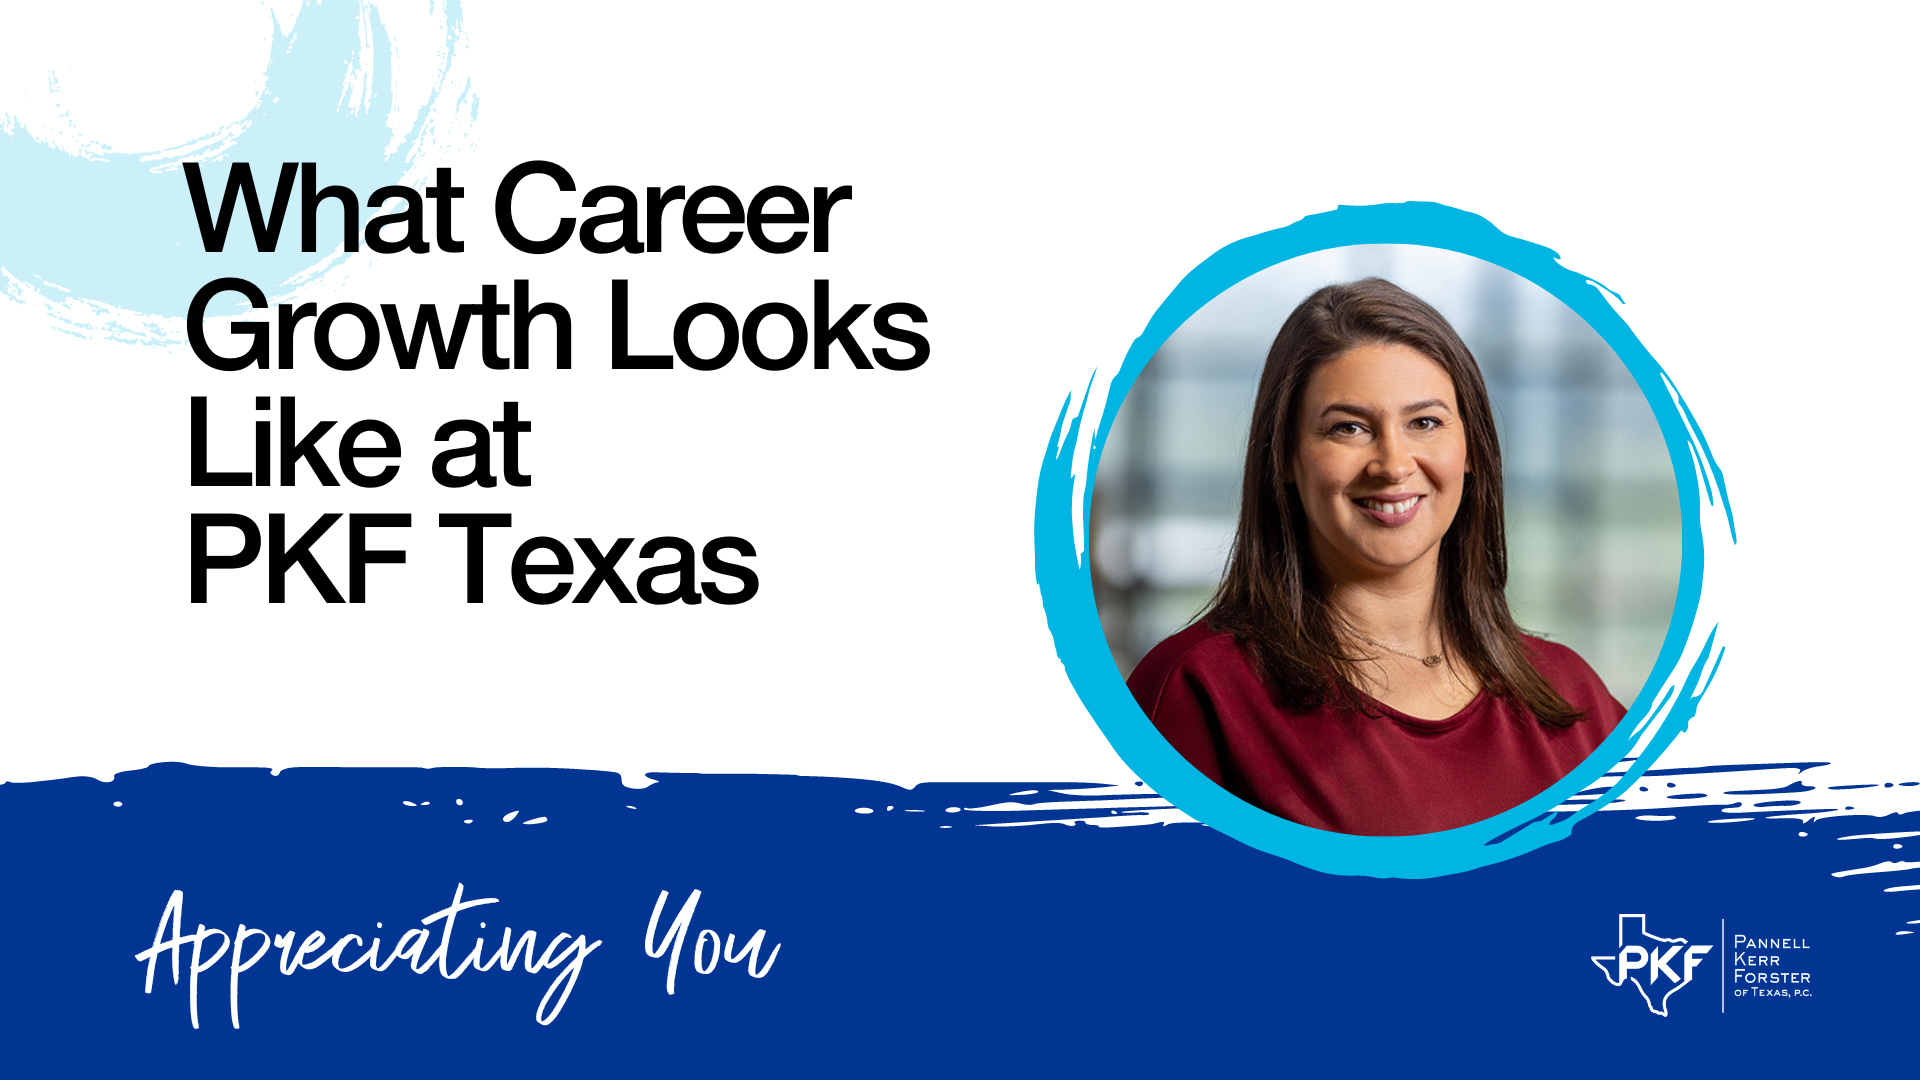 Video thumbnail for "What Career Growth Looks Like at PKF Texas."